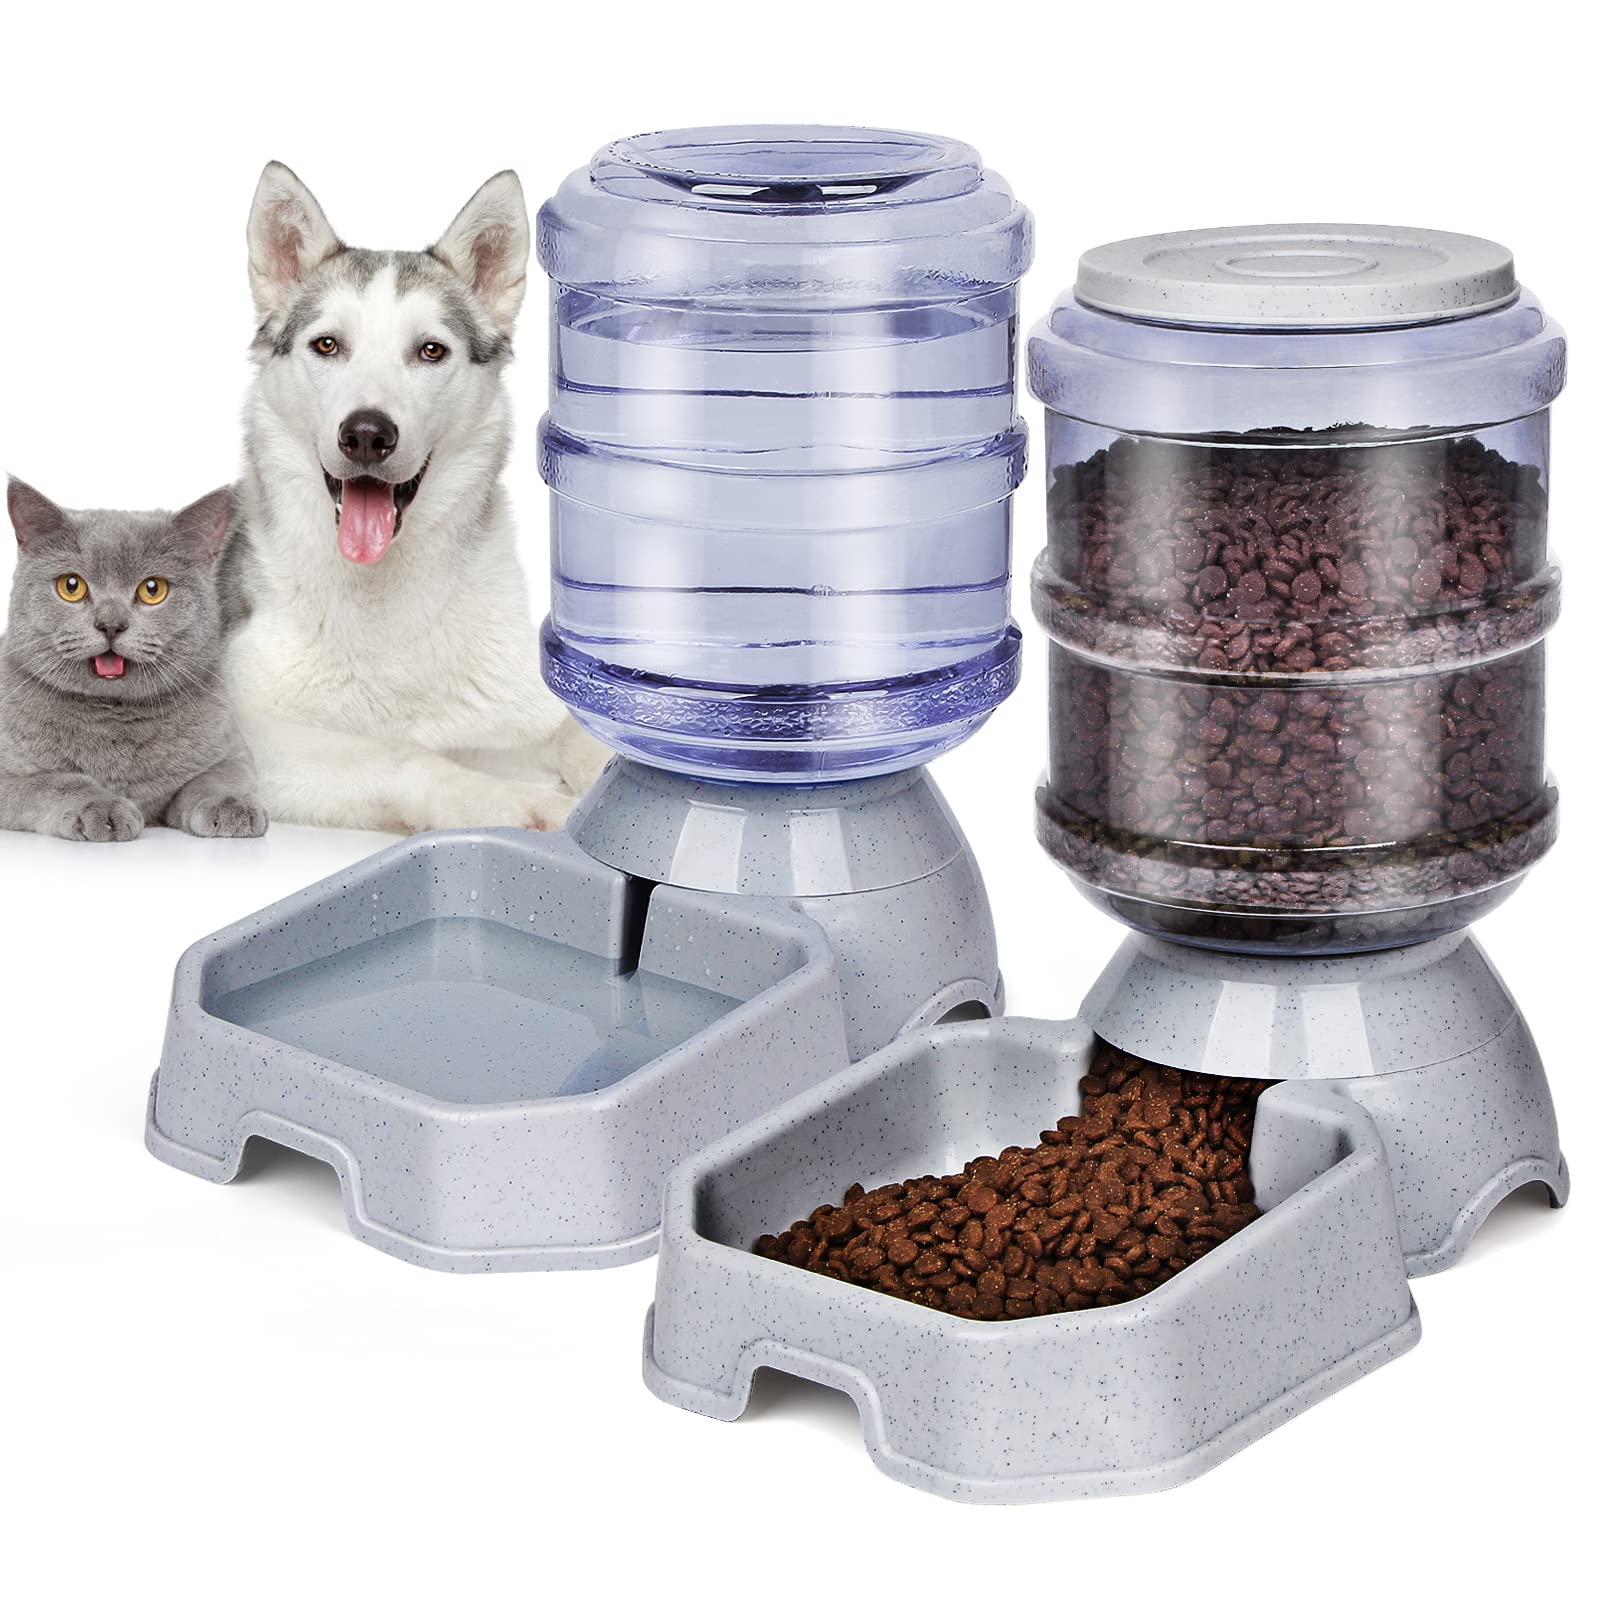 DIY self-filling dog food feeder and automatic watering sys 